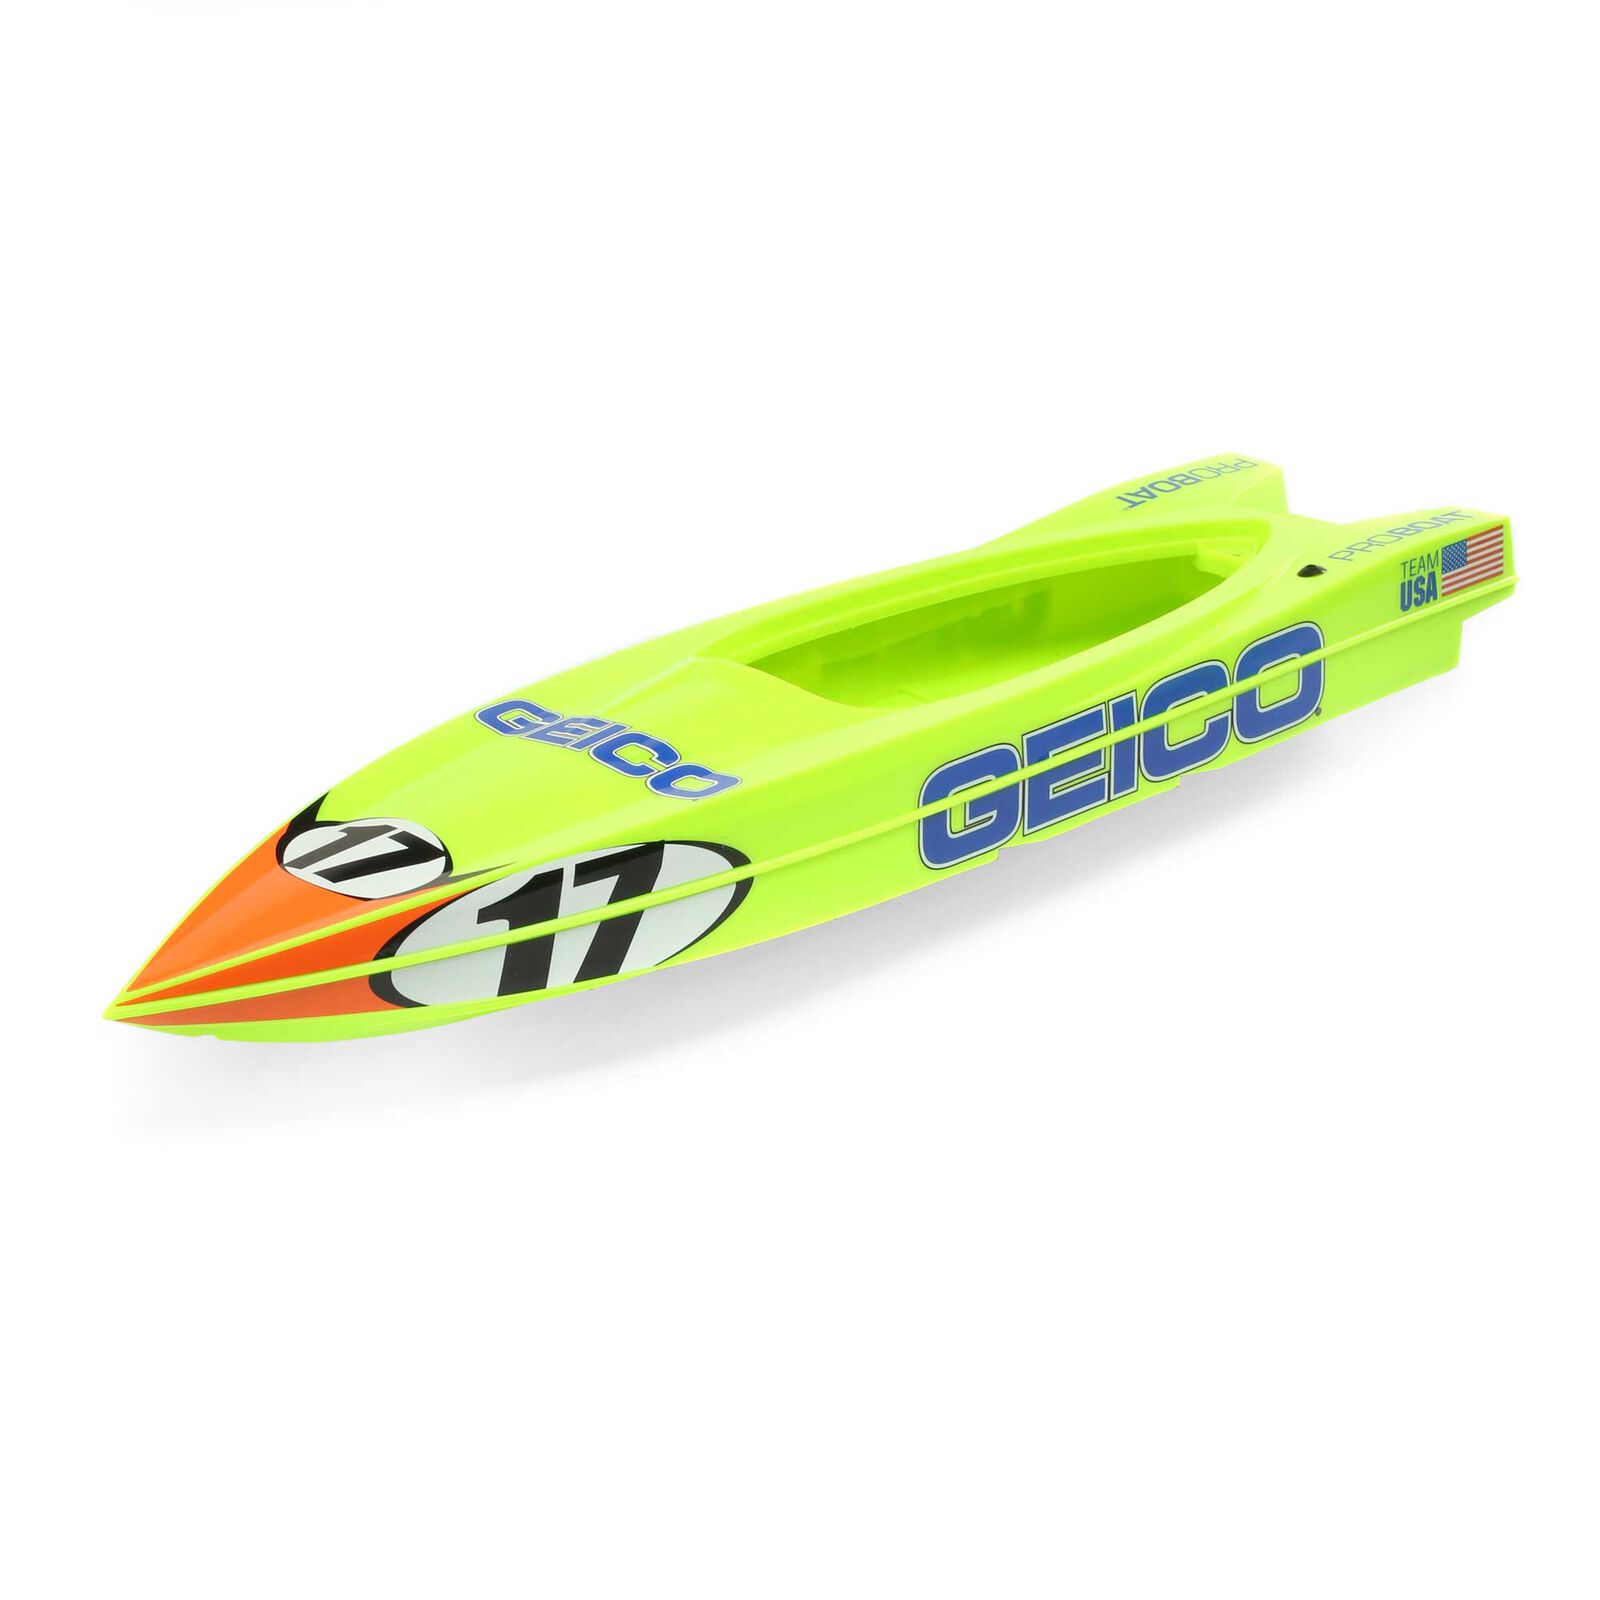 Hull: Miss Geico 17-inch Power Boat Racer